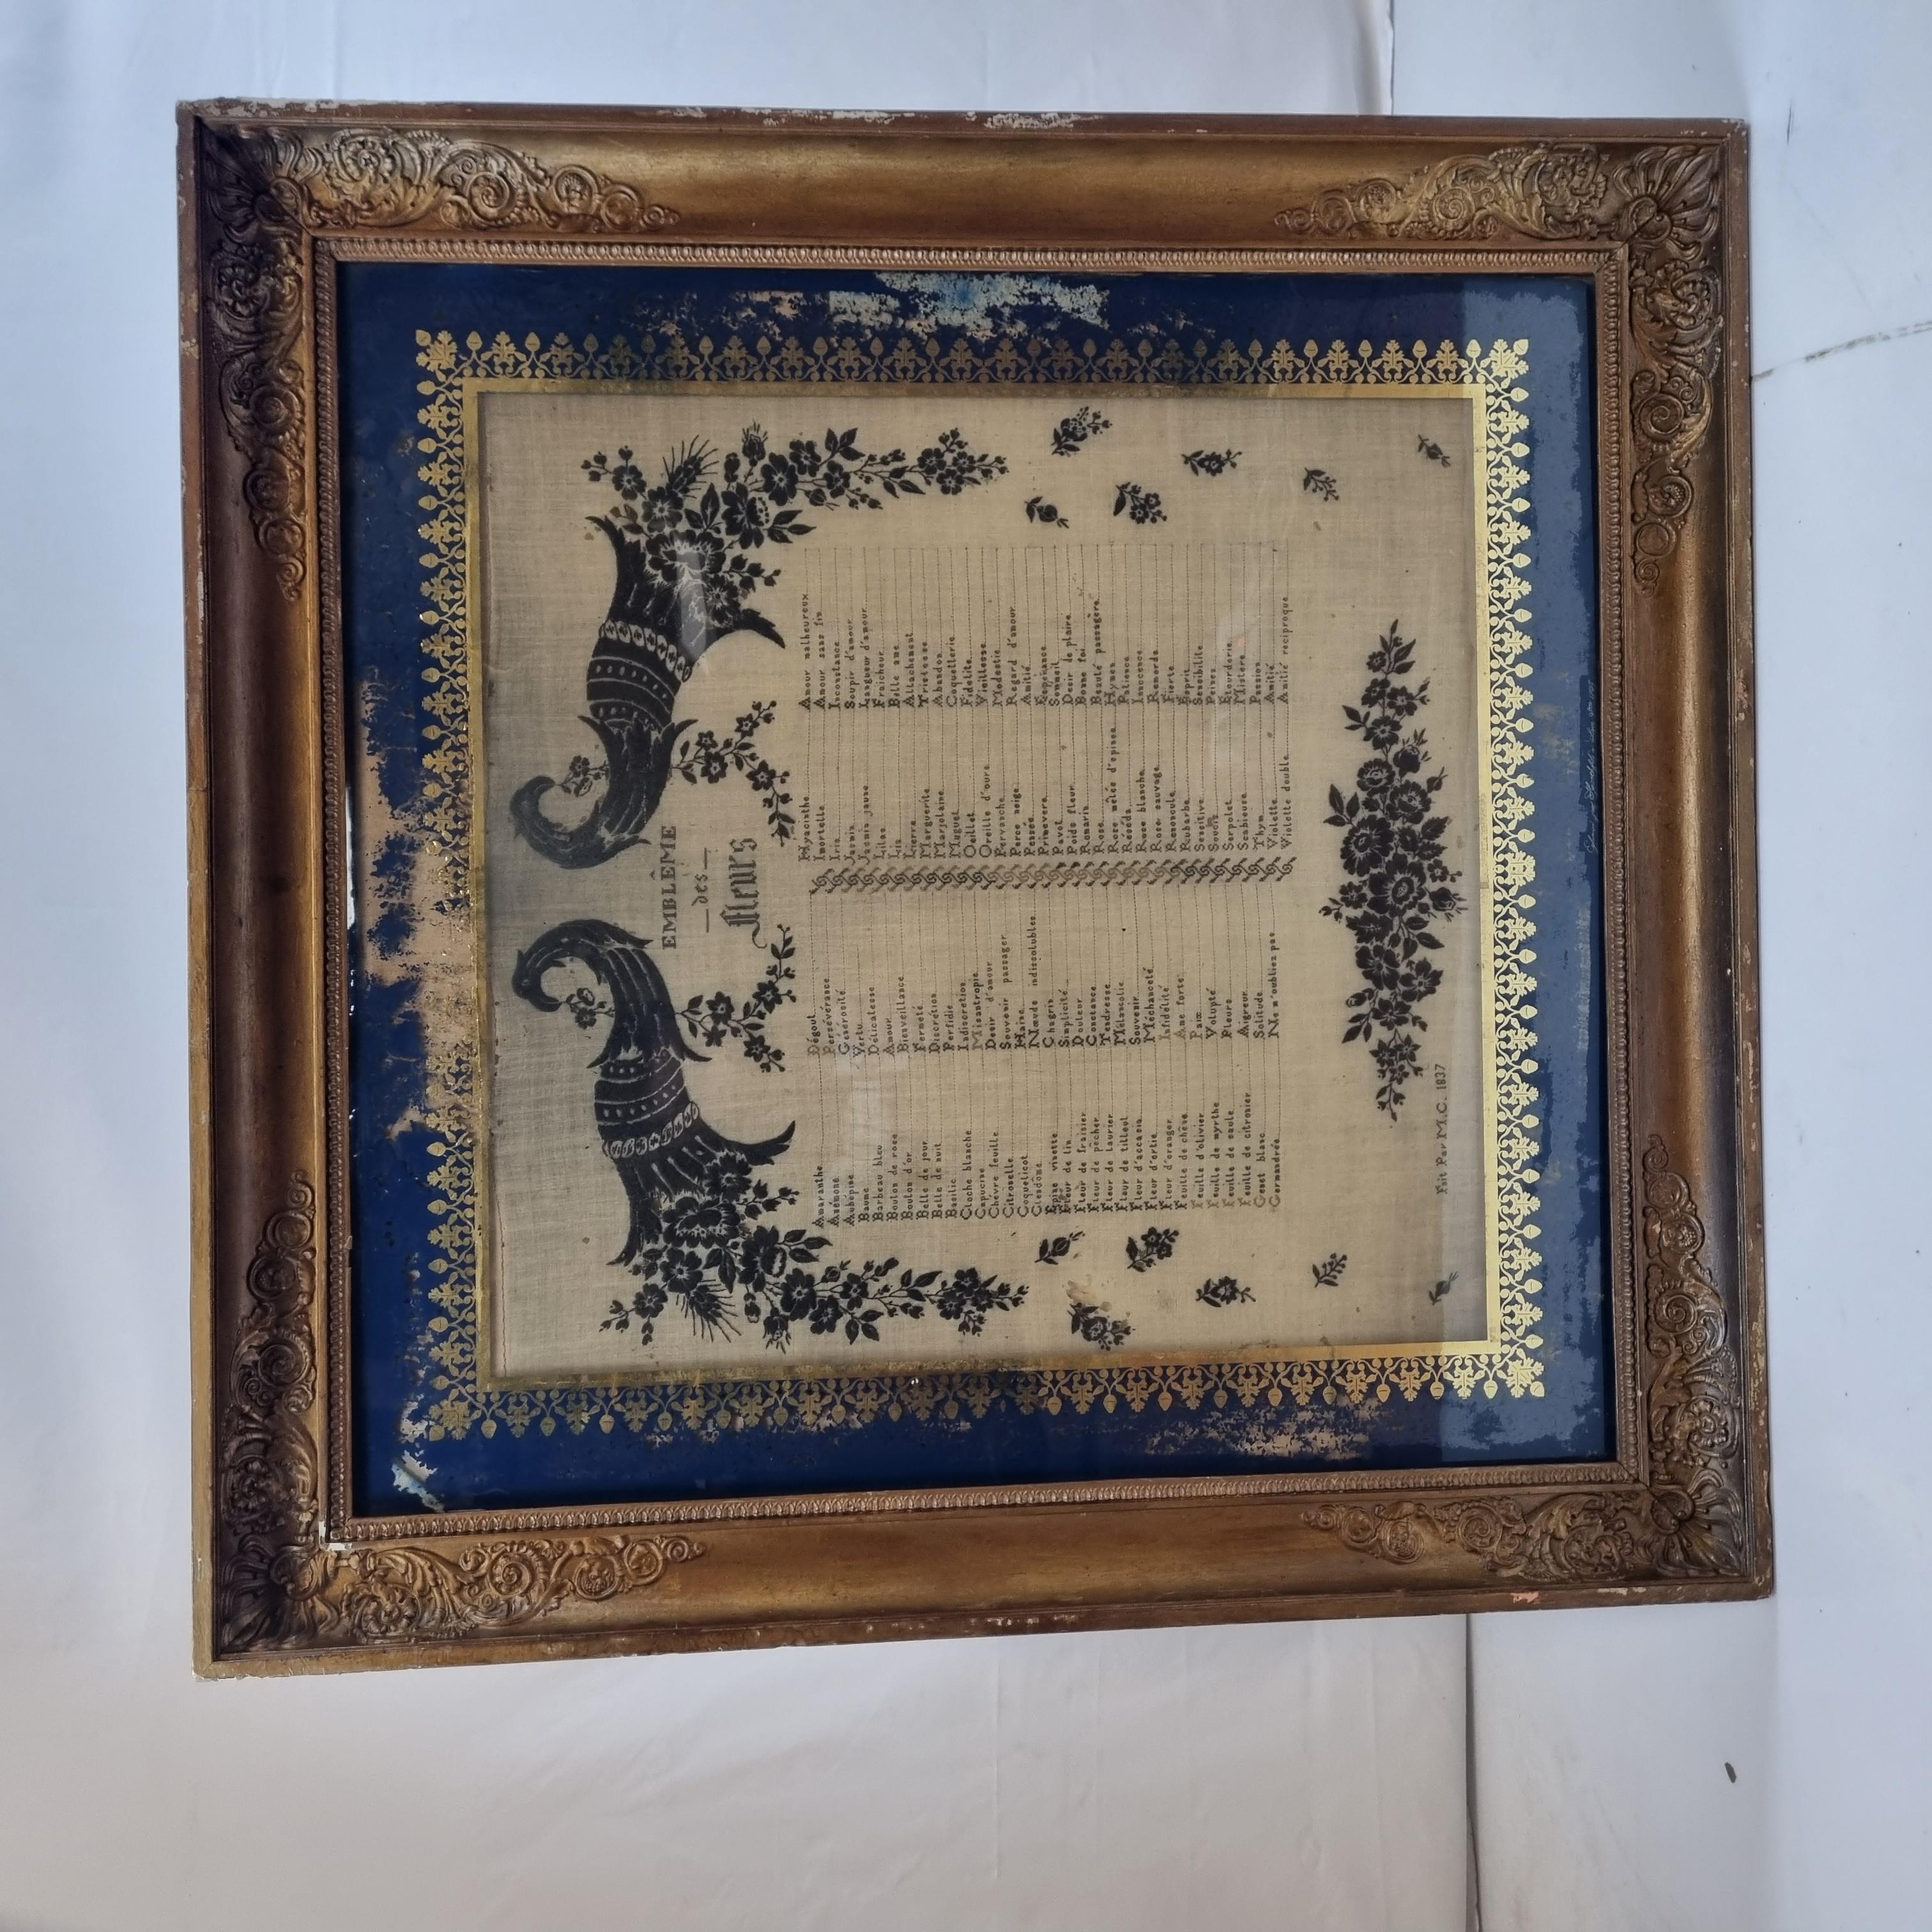 Small French embroidery dated 1837 and framed with 